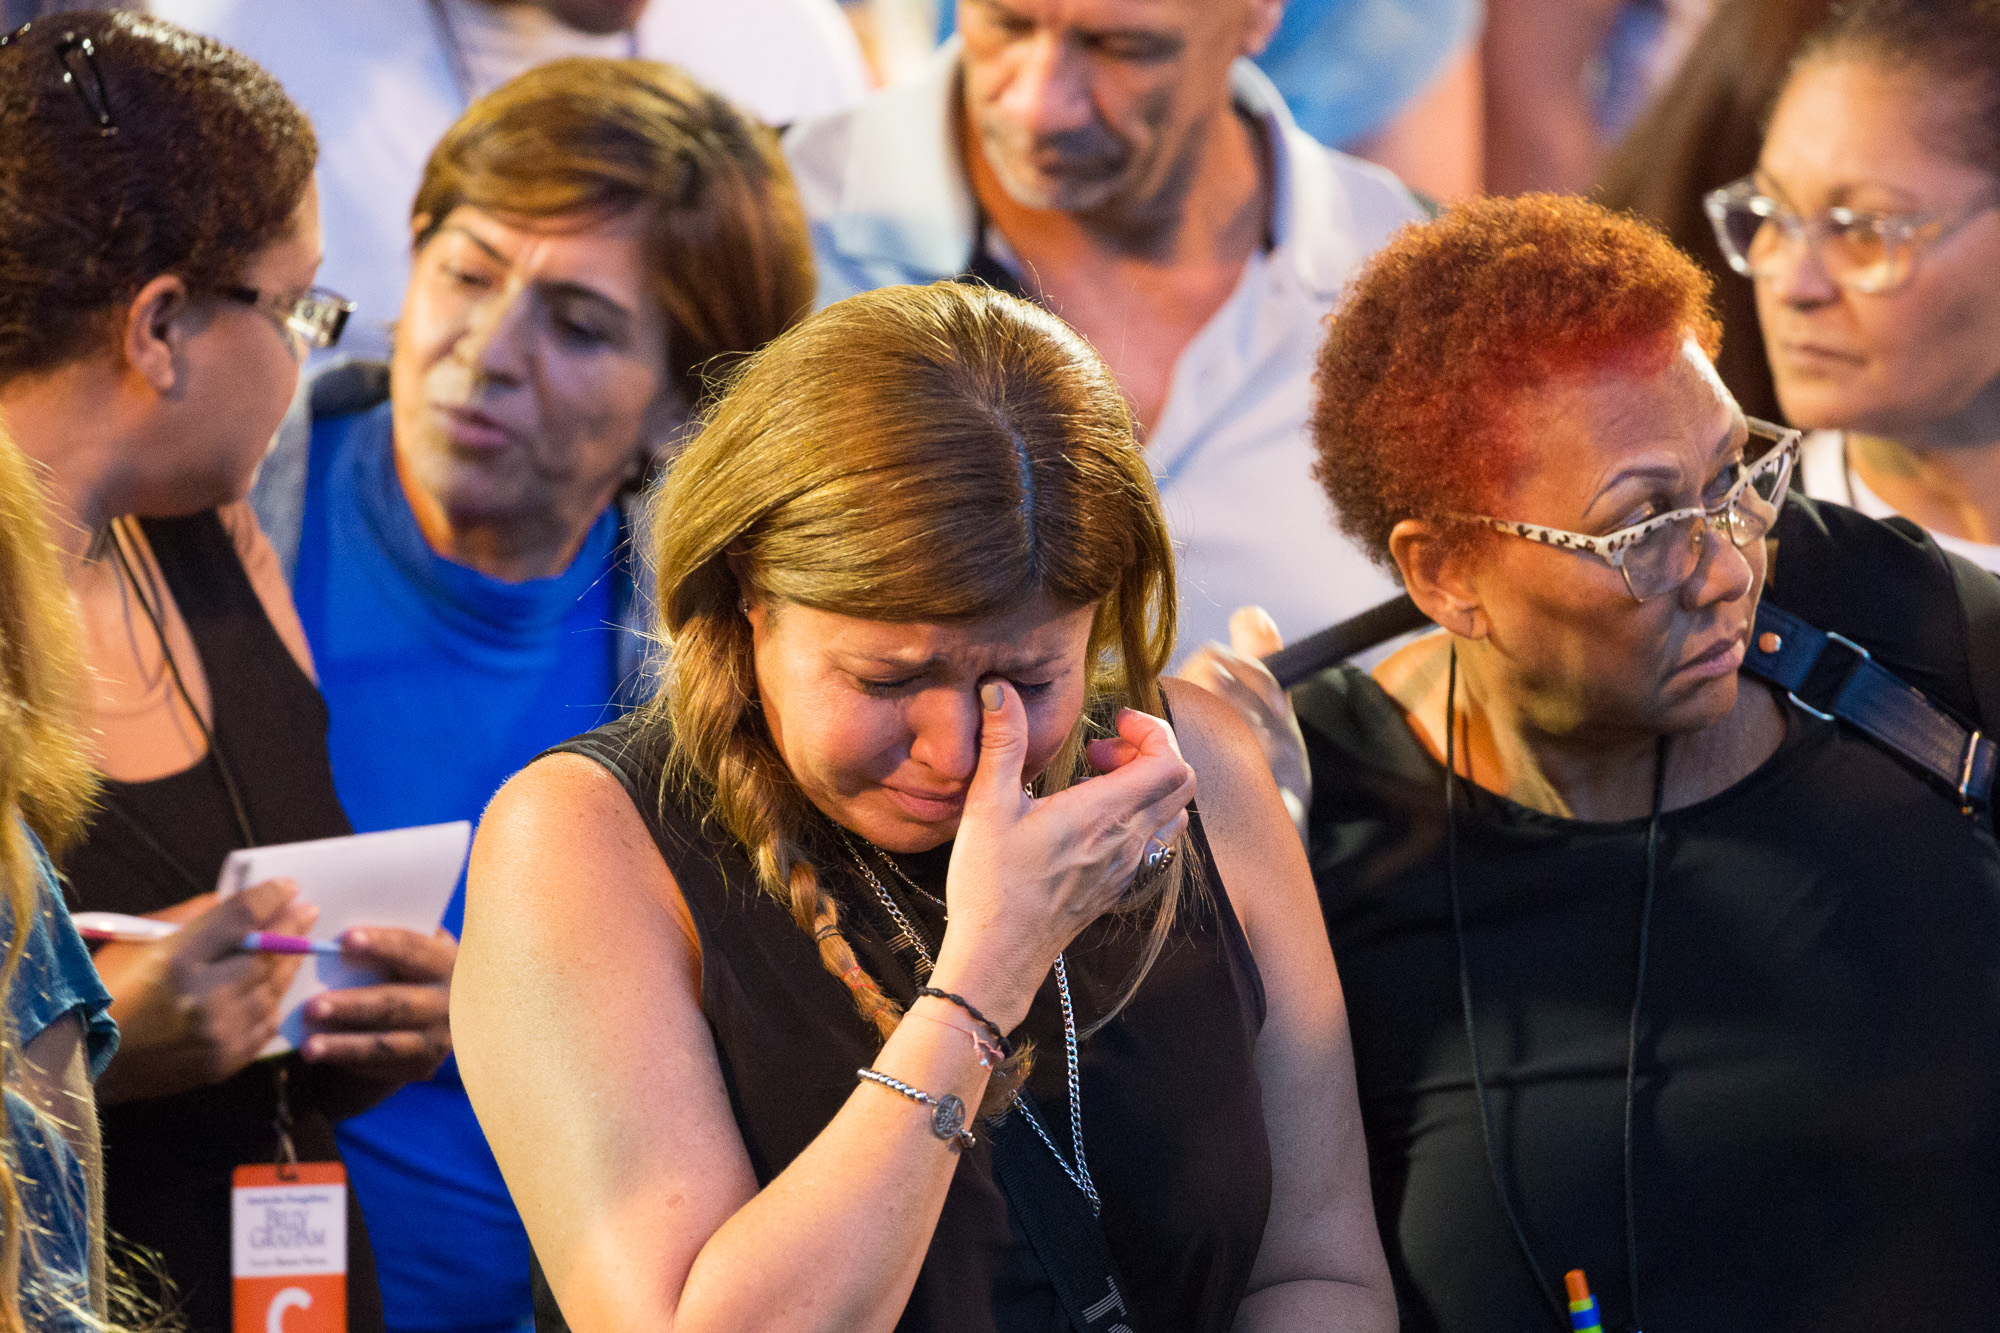 Woman wipes away tear at Festival